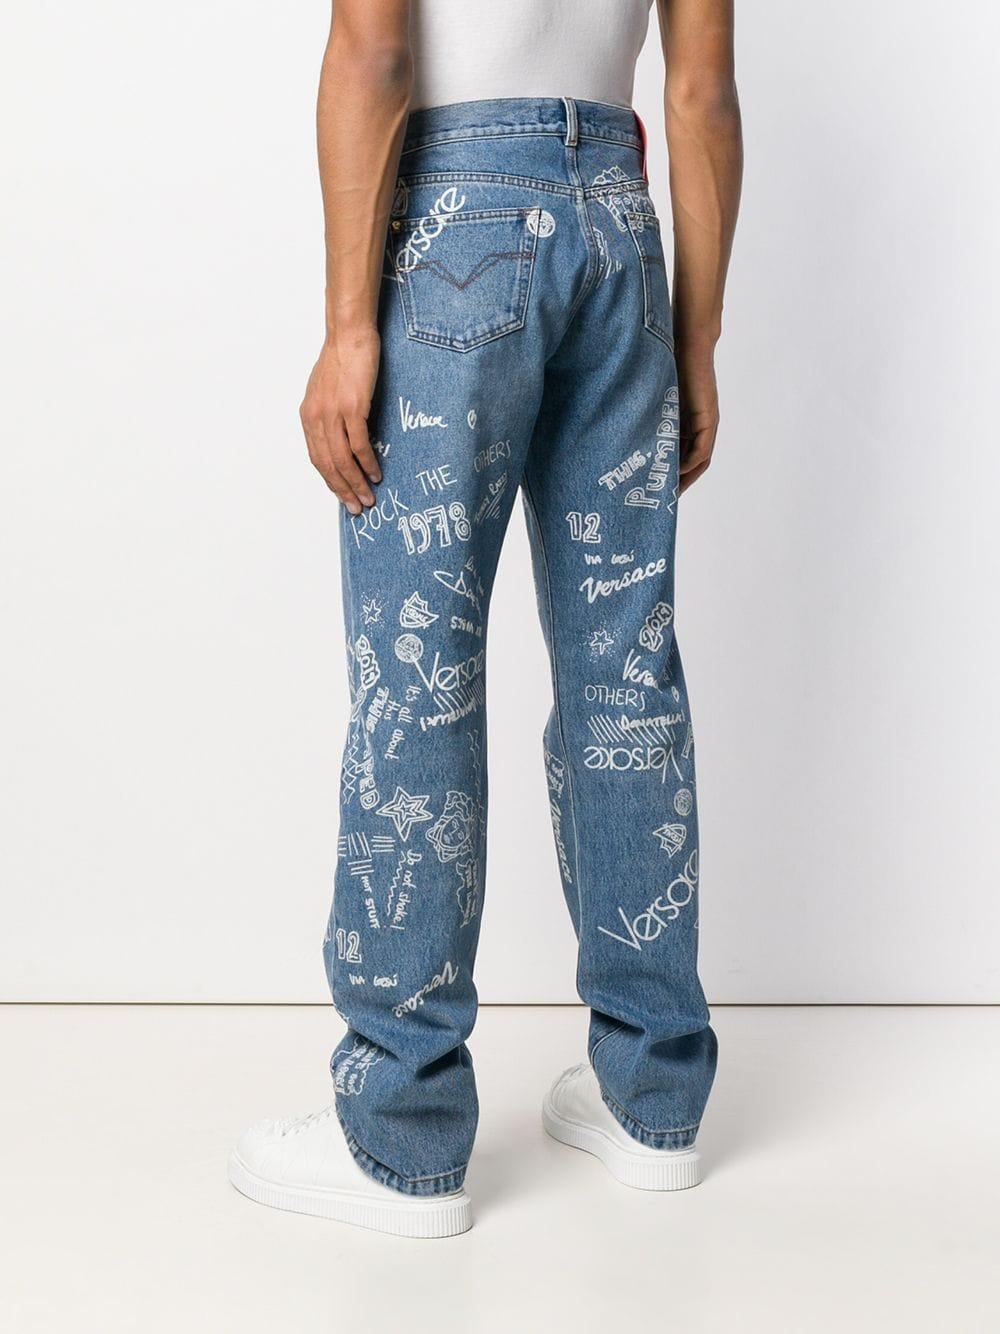 graphic jeans mens